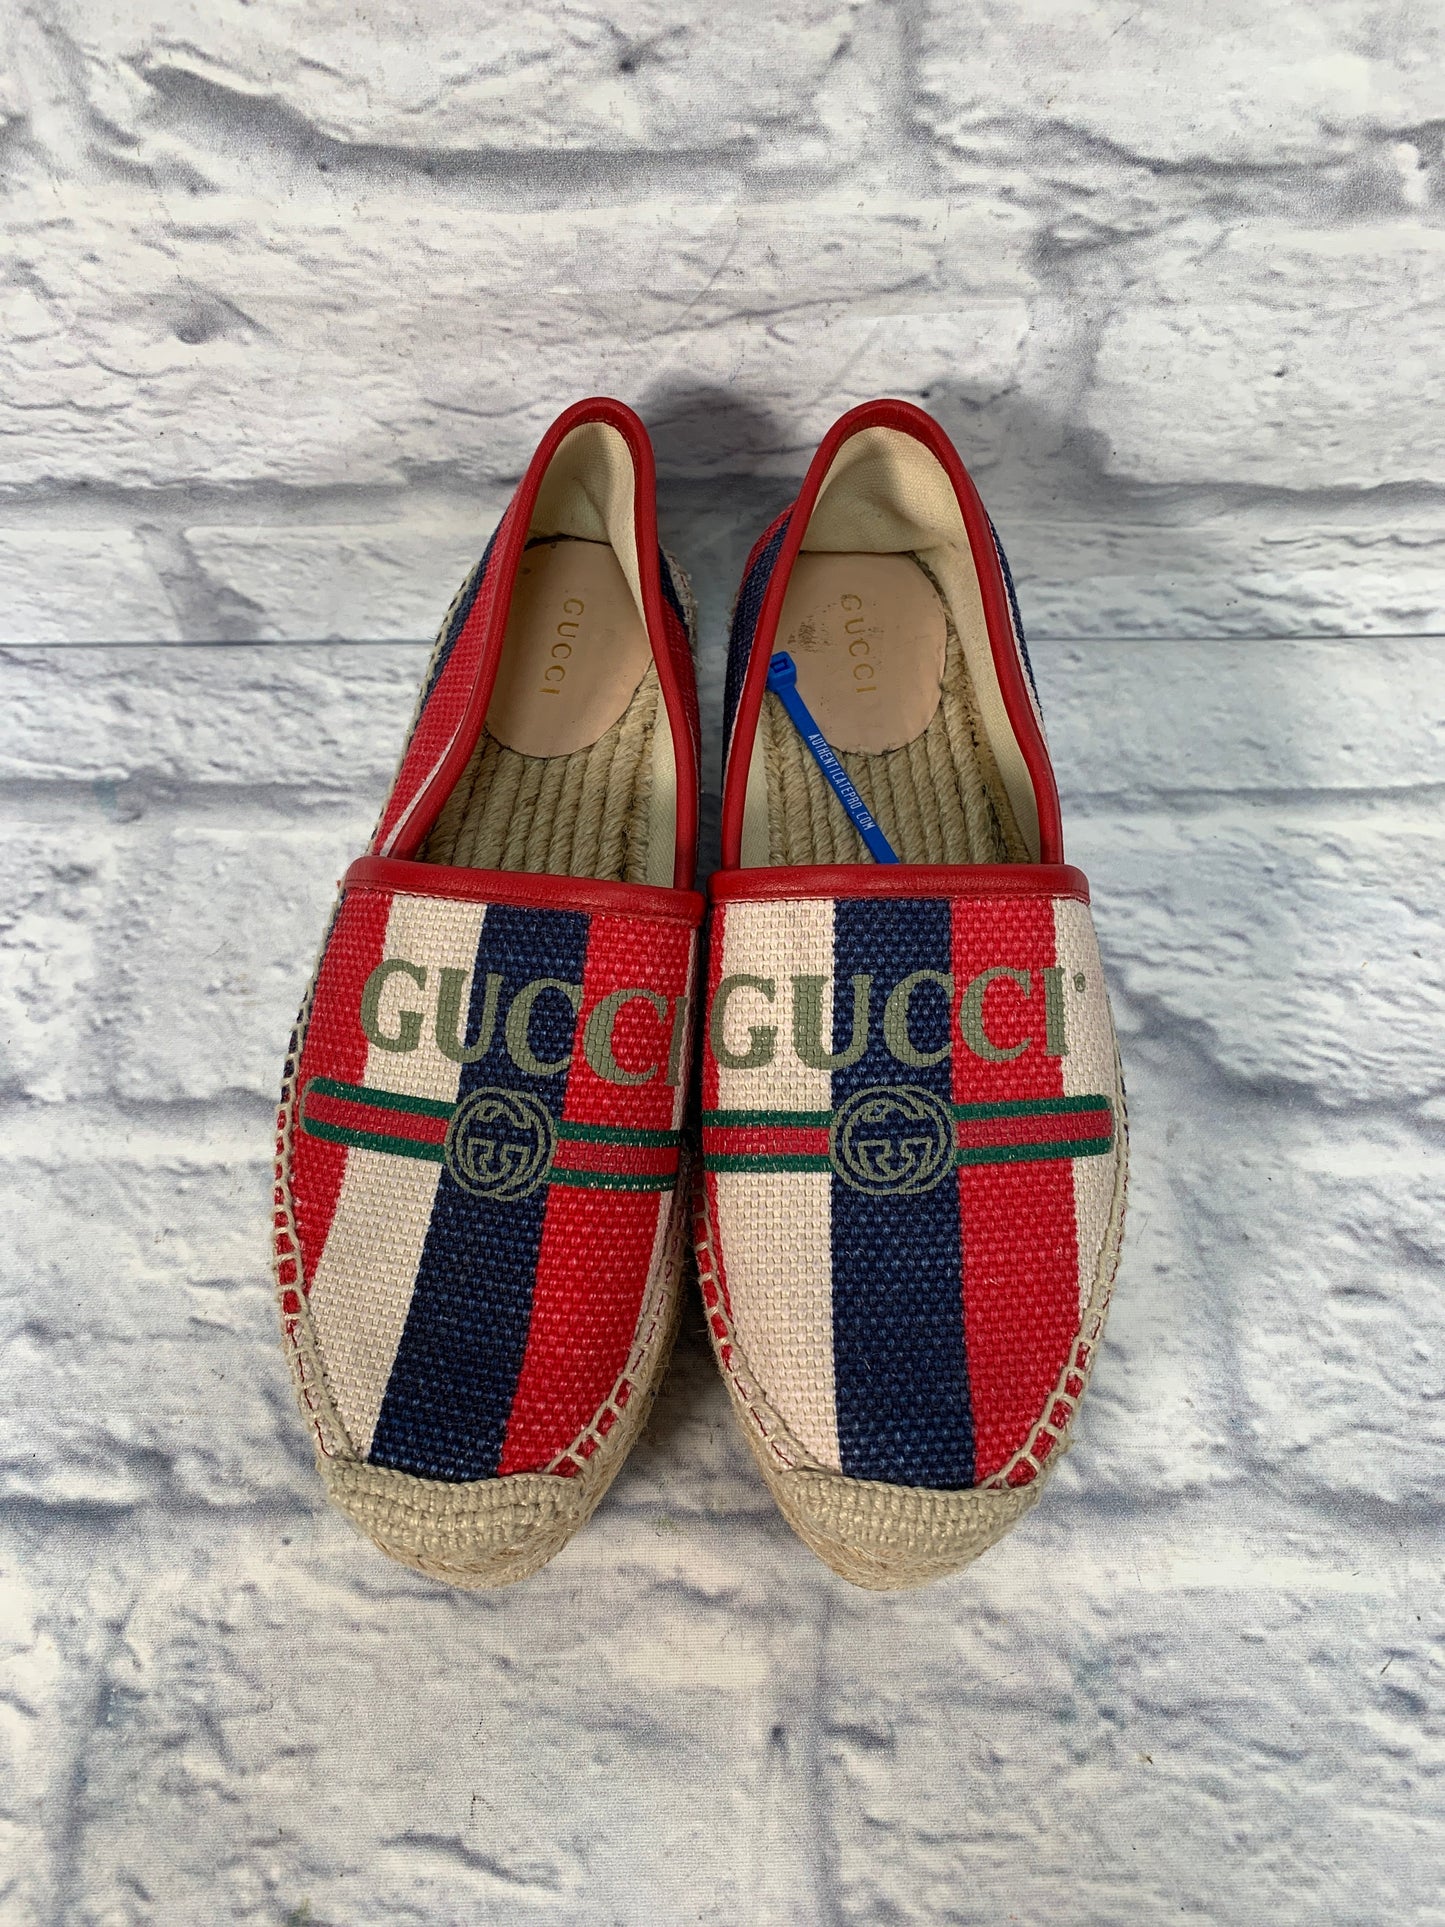 Blue & Red Shoes Luxury Designer Gucci, Size 7